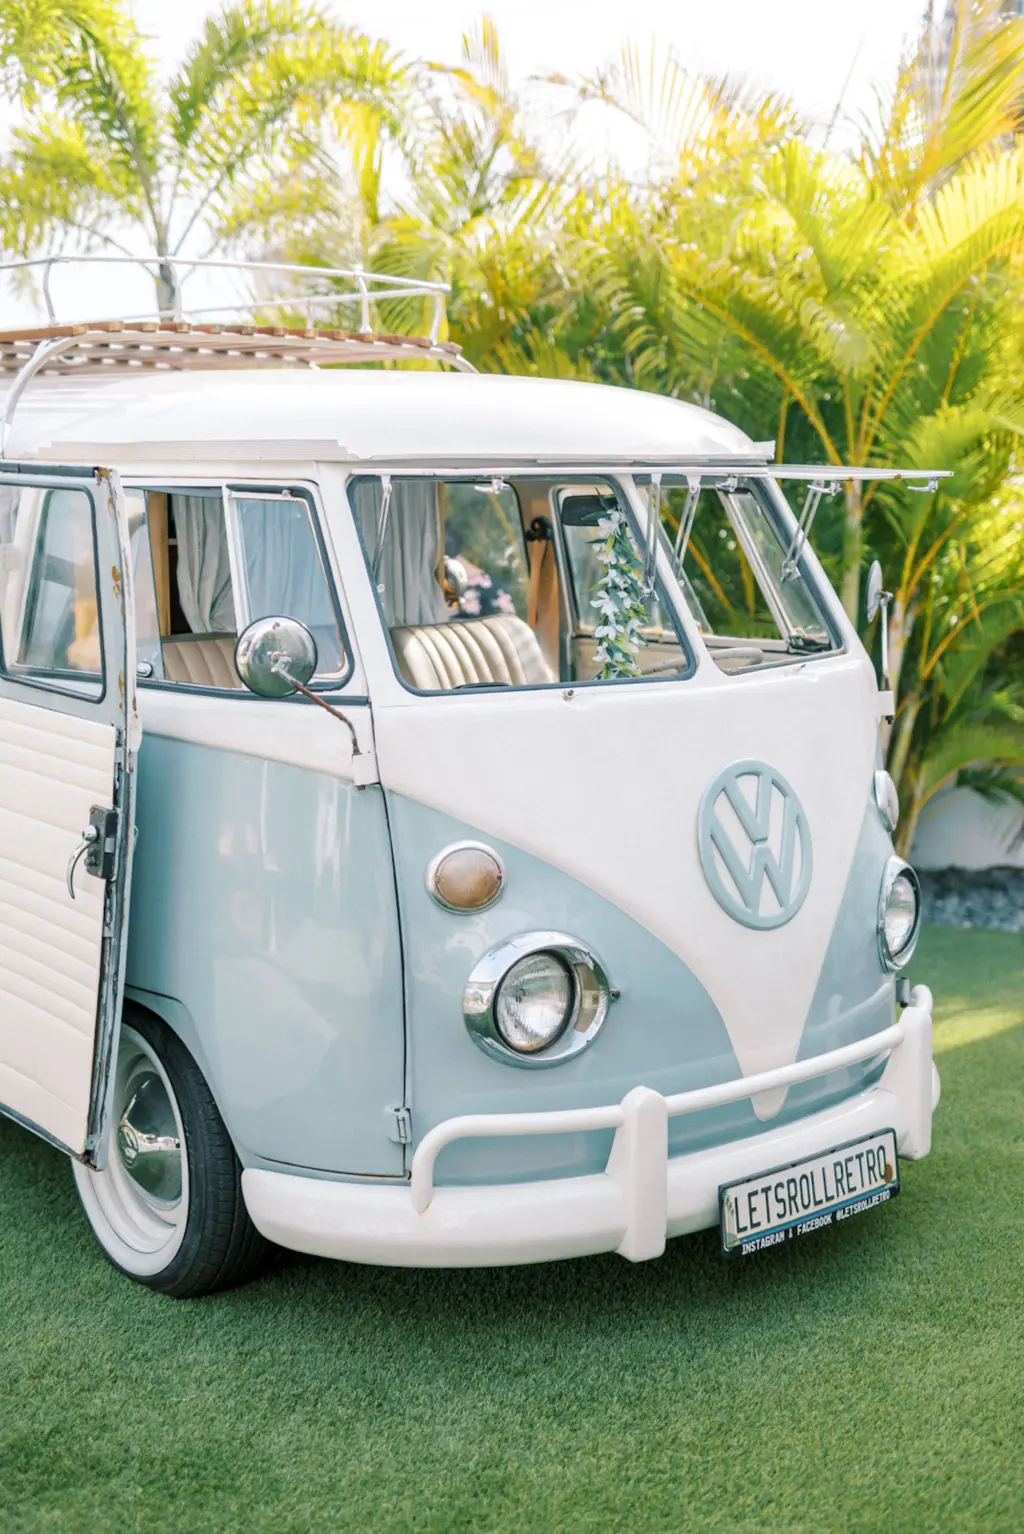 Baby Blue and White Volkswagen VW Mobile Photobooth Bus Wedding Decor